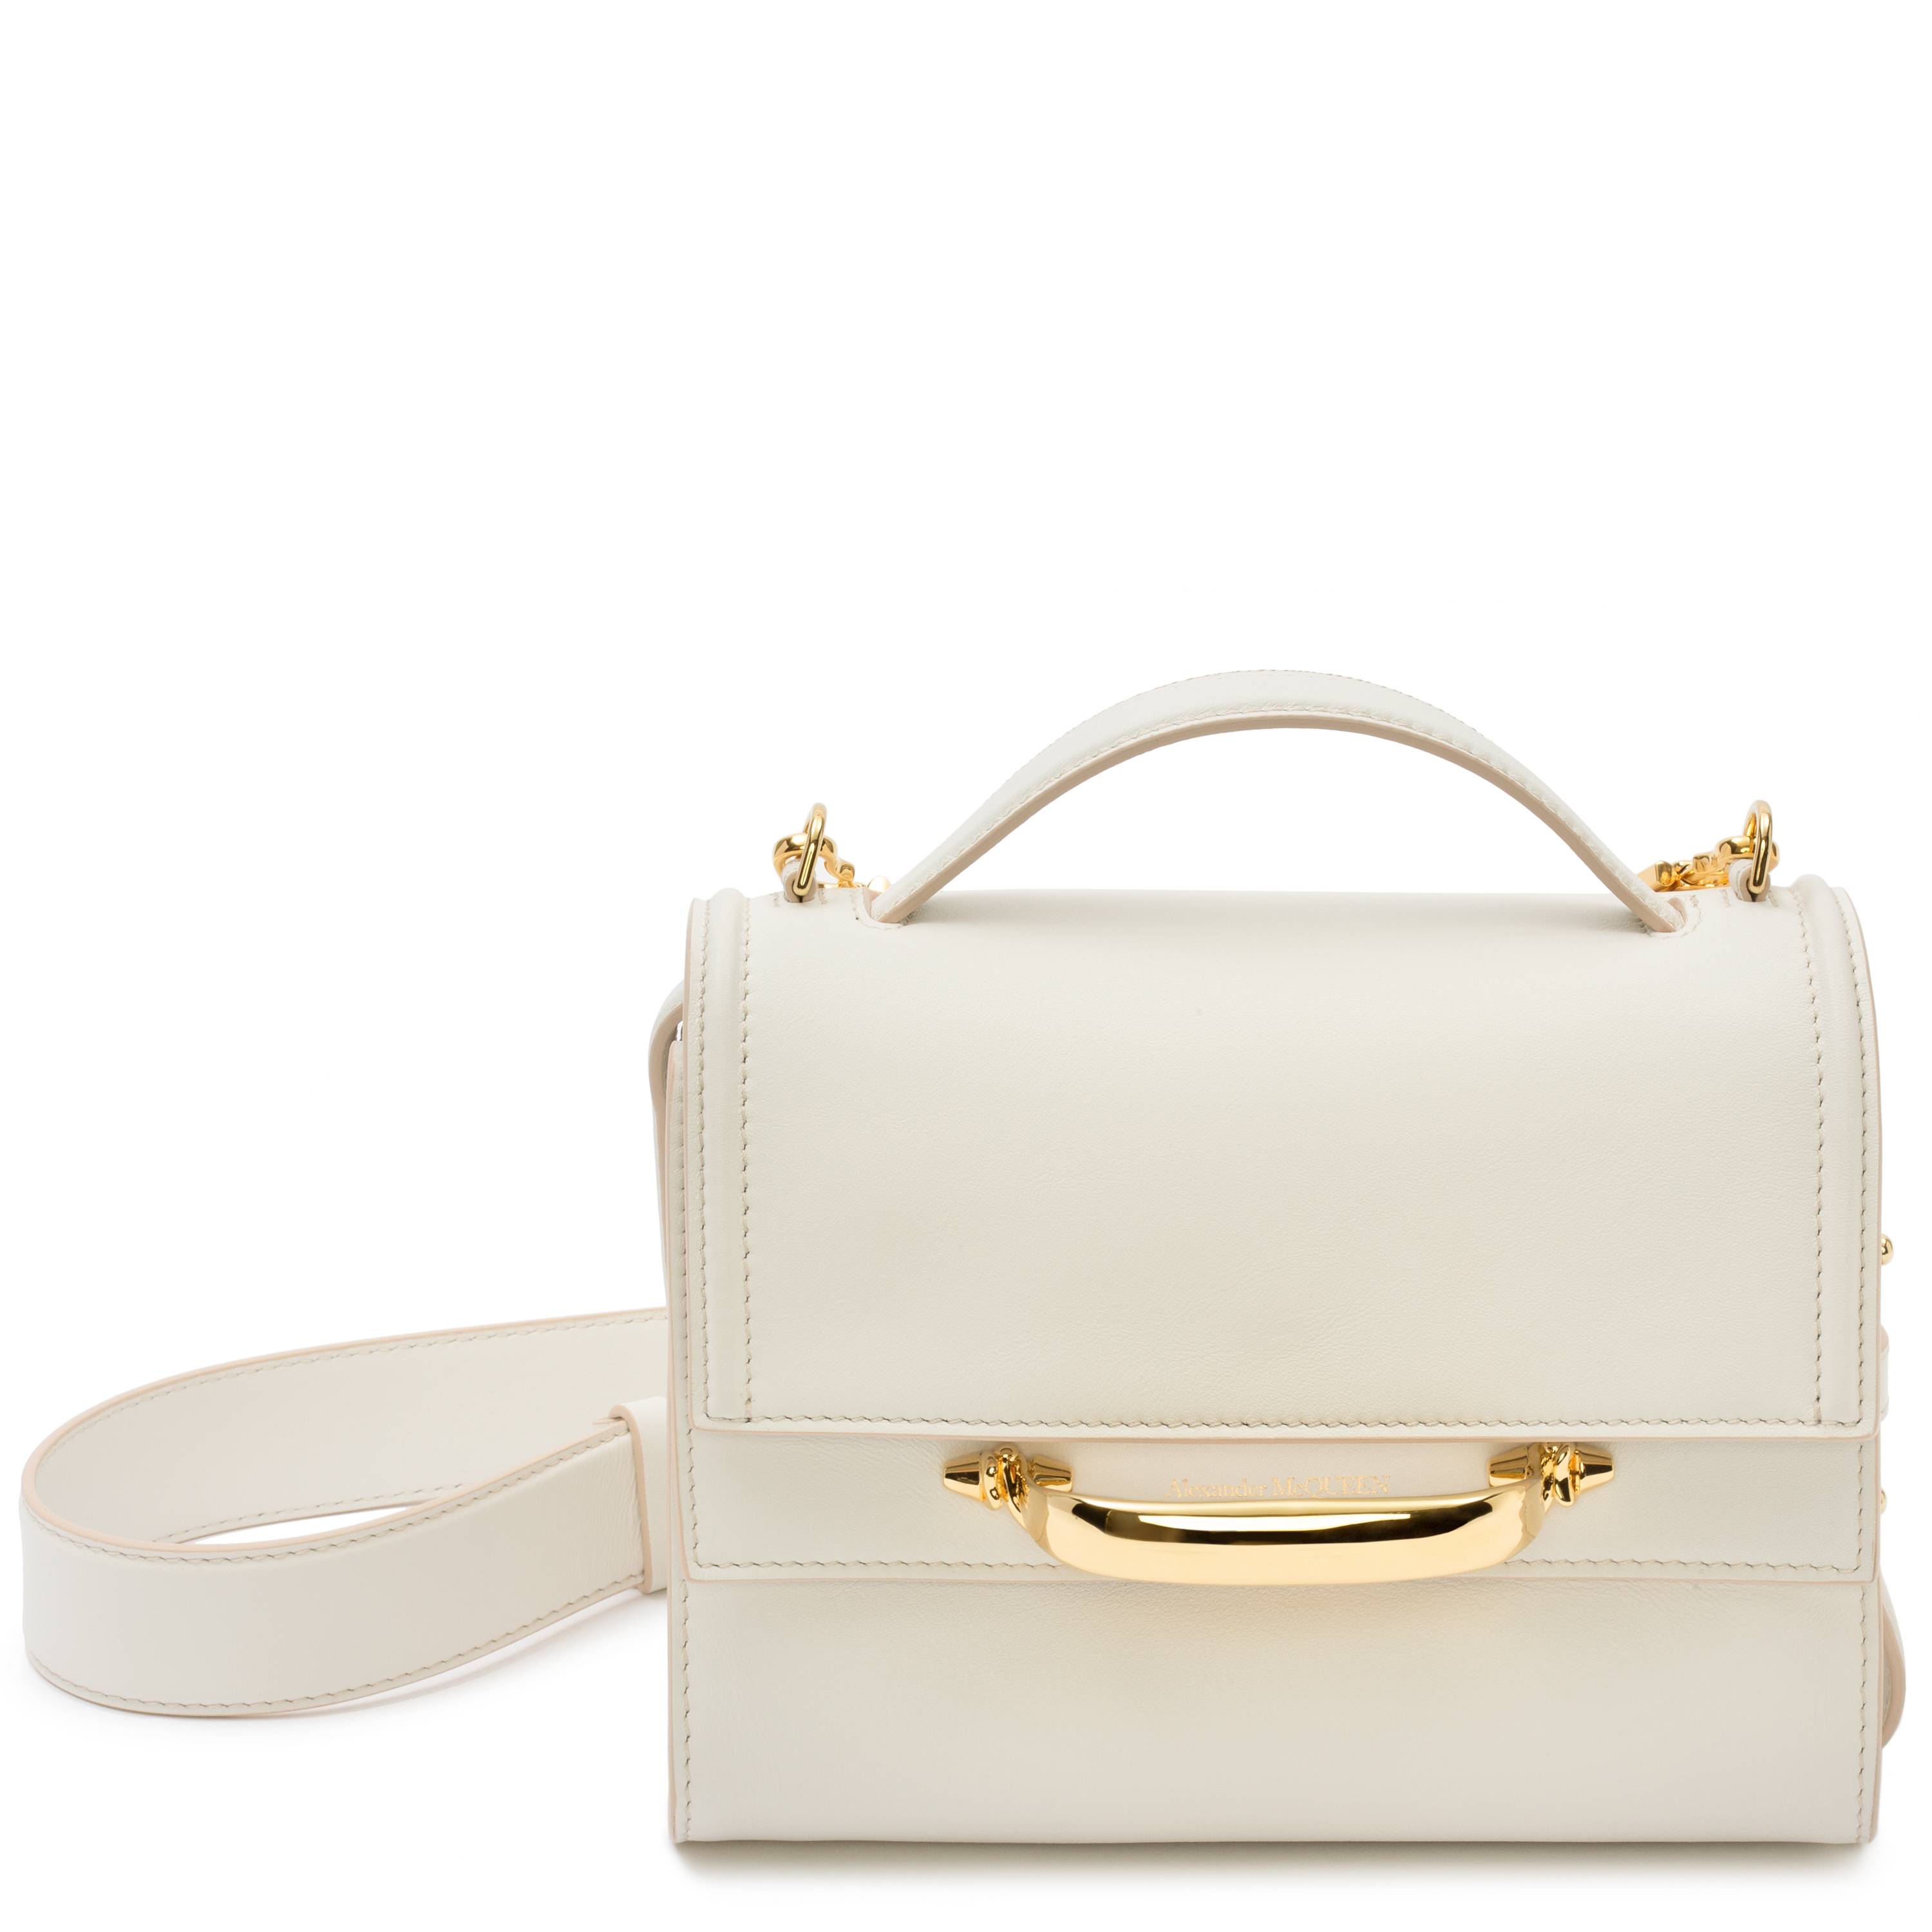 SS20 Ivory The Story $17,500